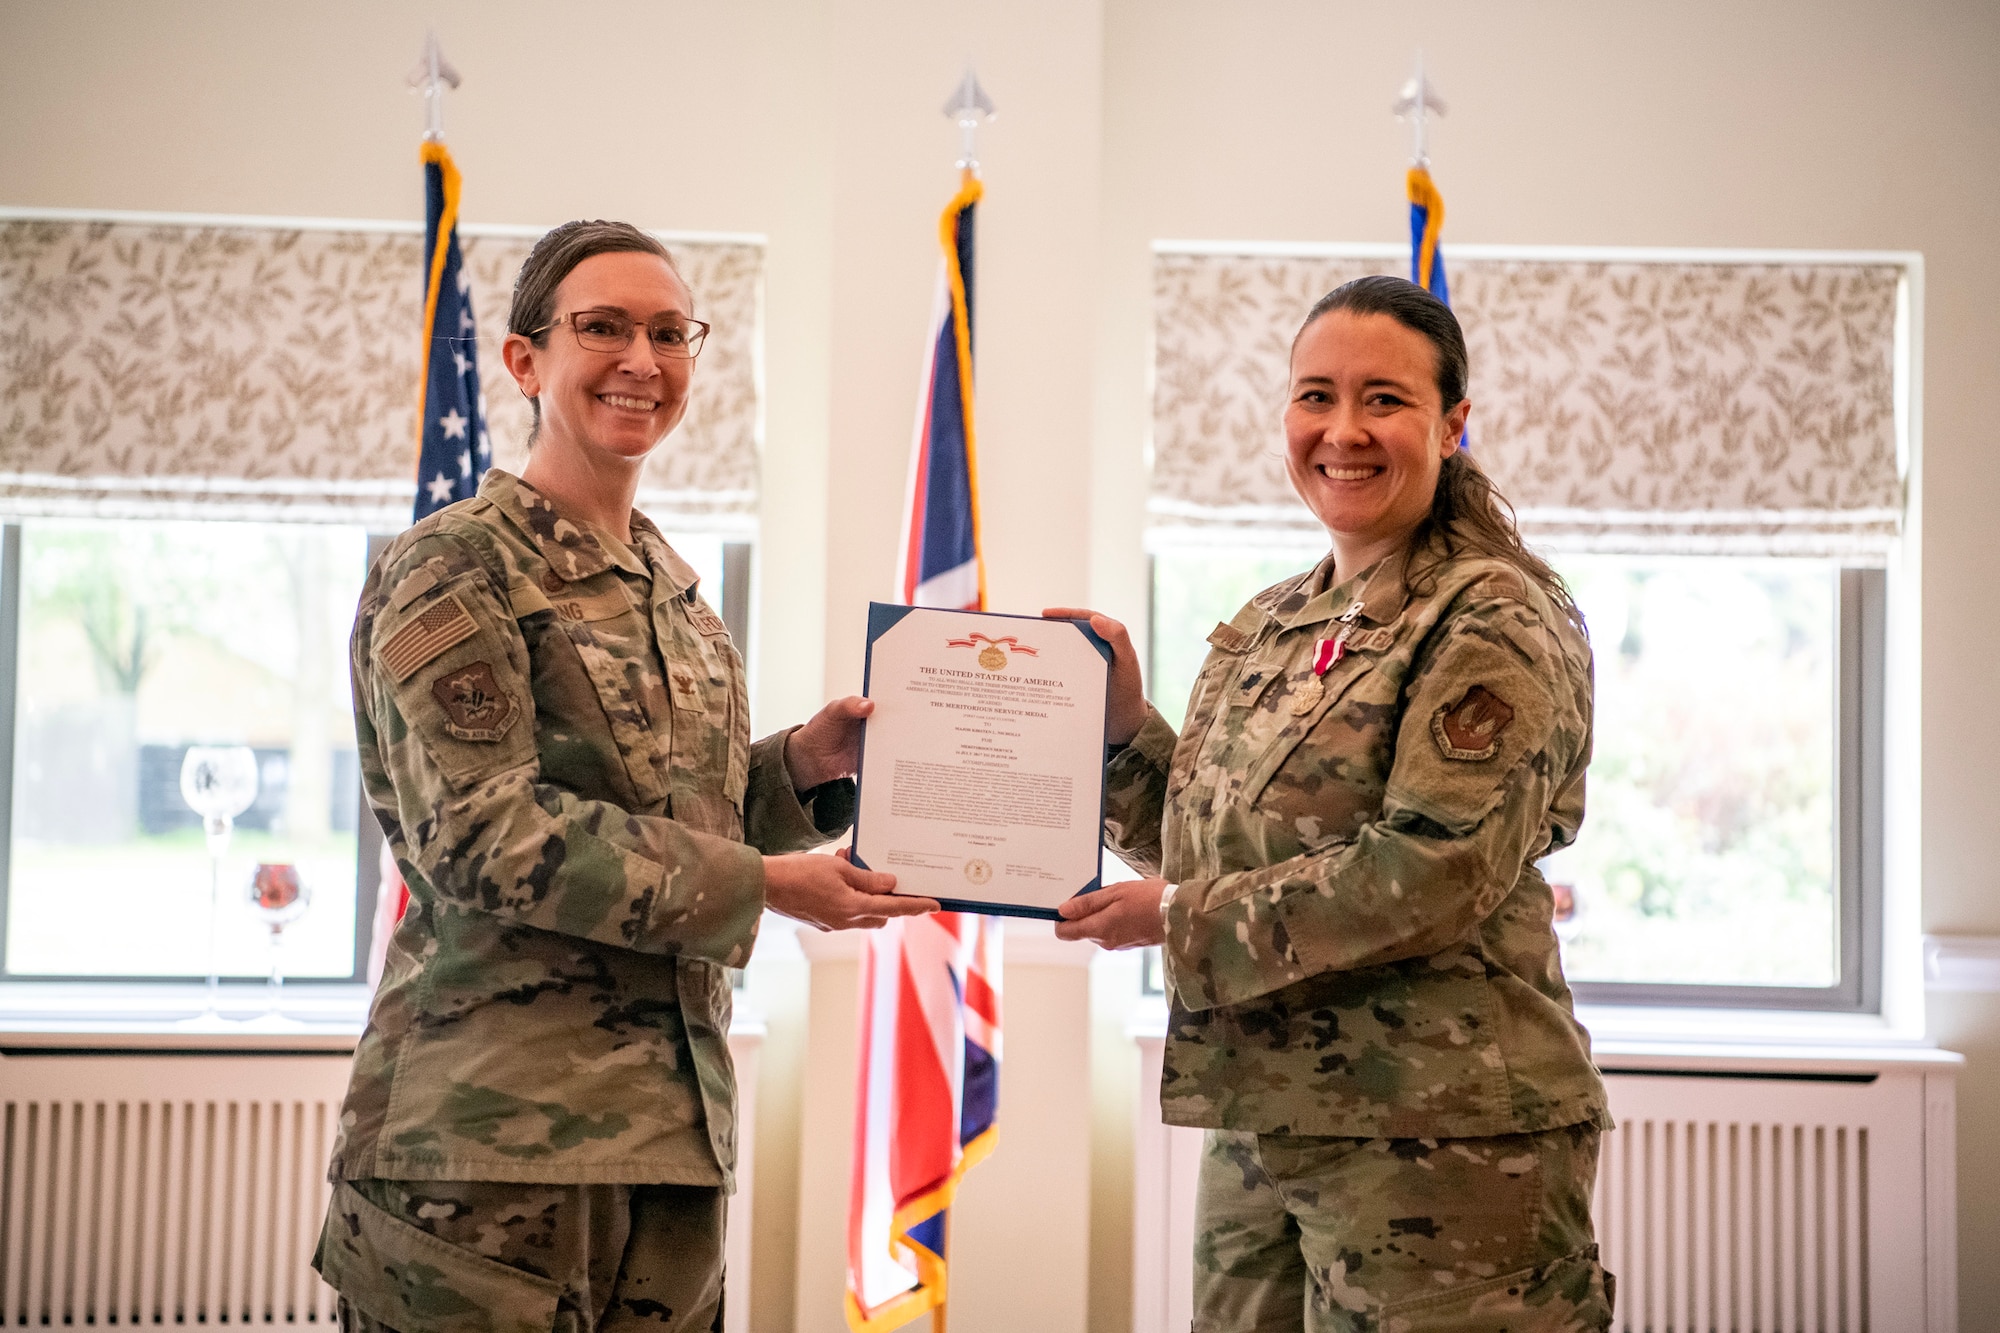 U.S. Air Force Col. Valarie Long, left, 423d Air Base Group commander, presents a Meritorious Service Medal decoration to Lt. Col. Kirsten Nicholls, 423d Force Support Squadron outgoing commander, at RAF Alconbury, England, June 5, 2023. During her command Nicholls implemented quality of life programs for 32 facilities across two installations. Her activities also served 12 joint force and multi-national mission partners. (U.S. Air Force photo by Staff Sgt. Eugene Oliver)